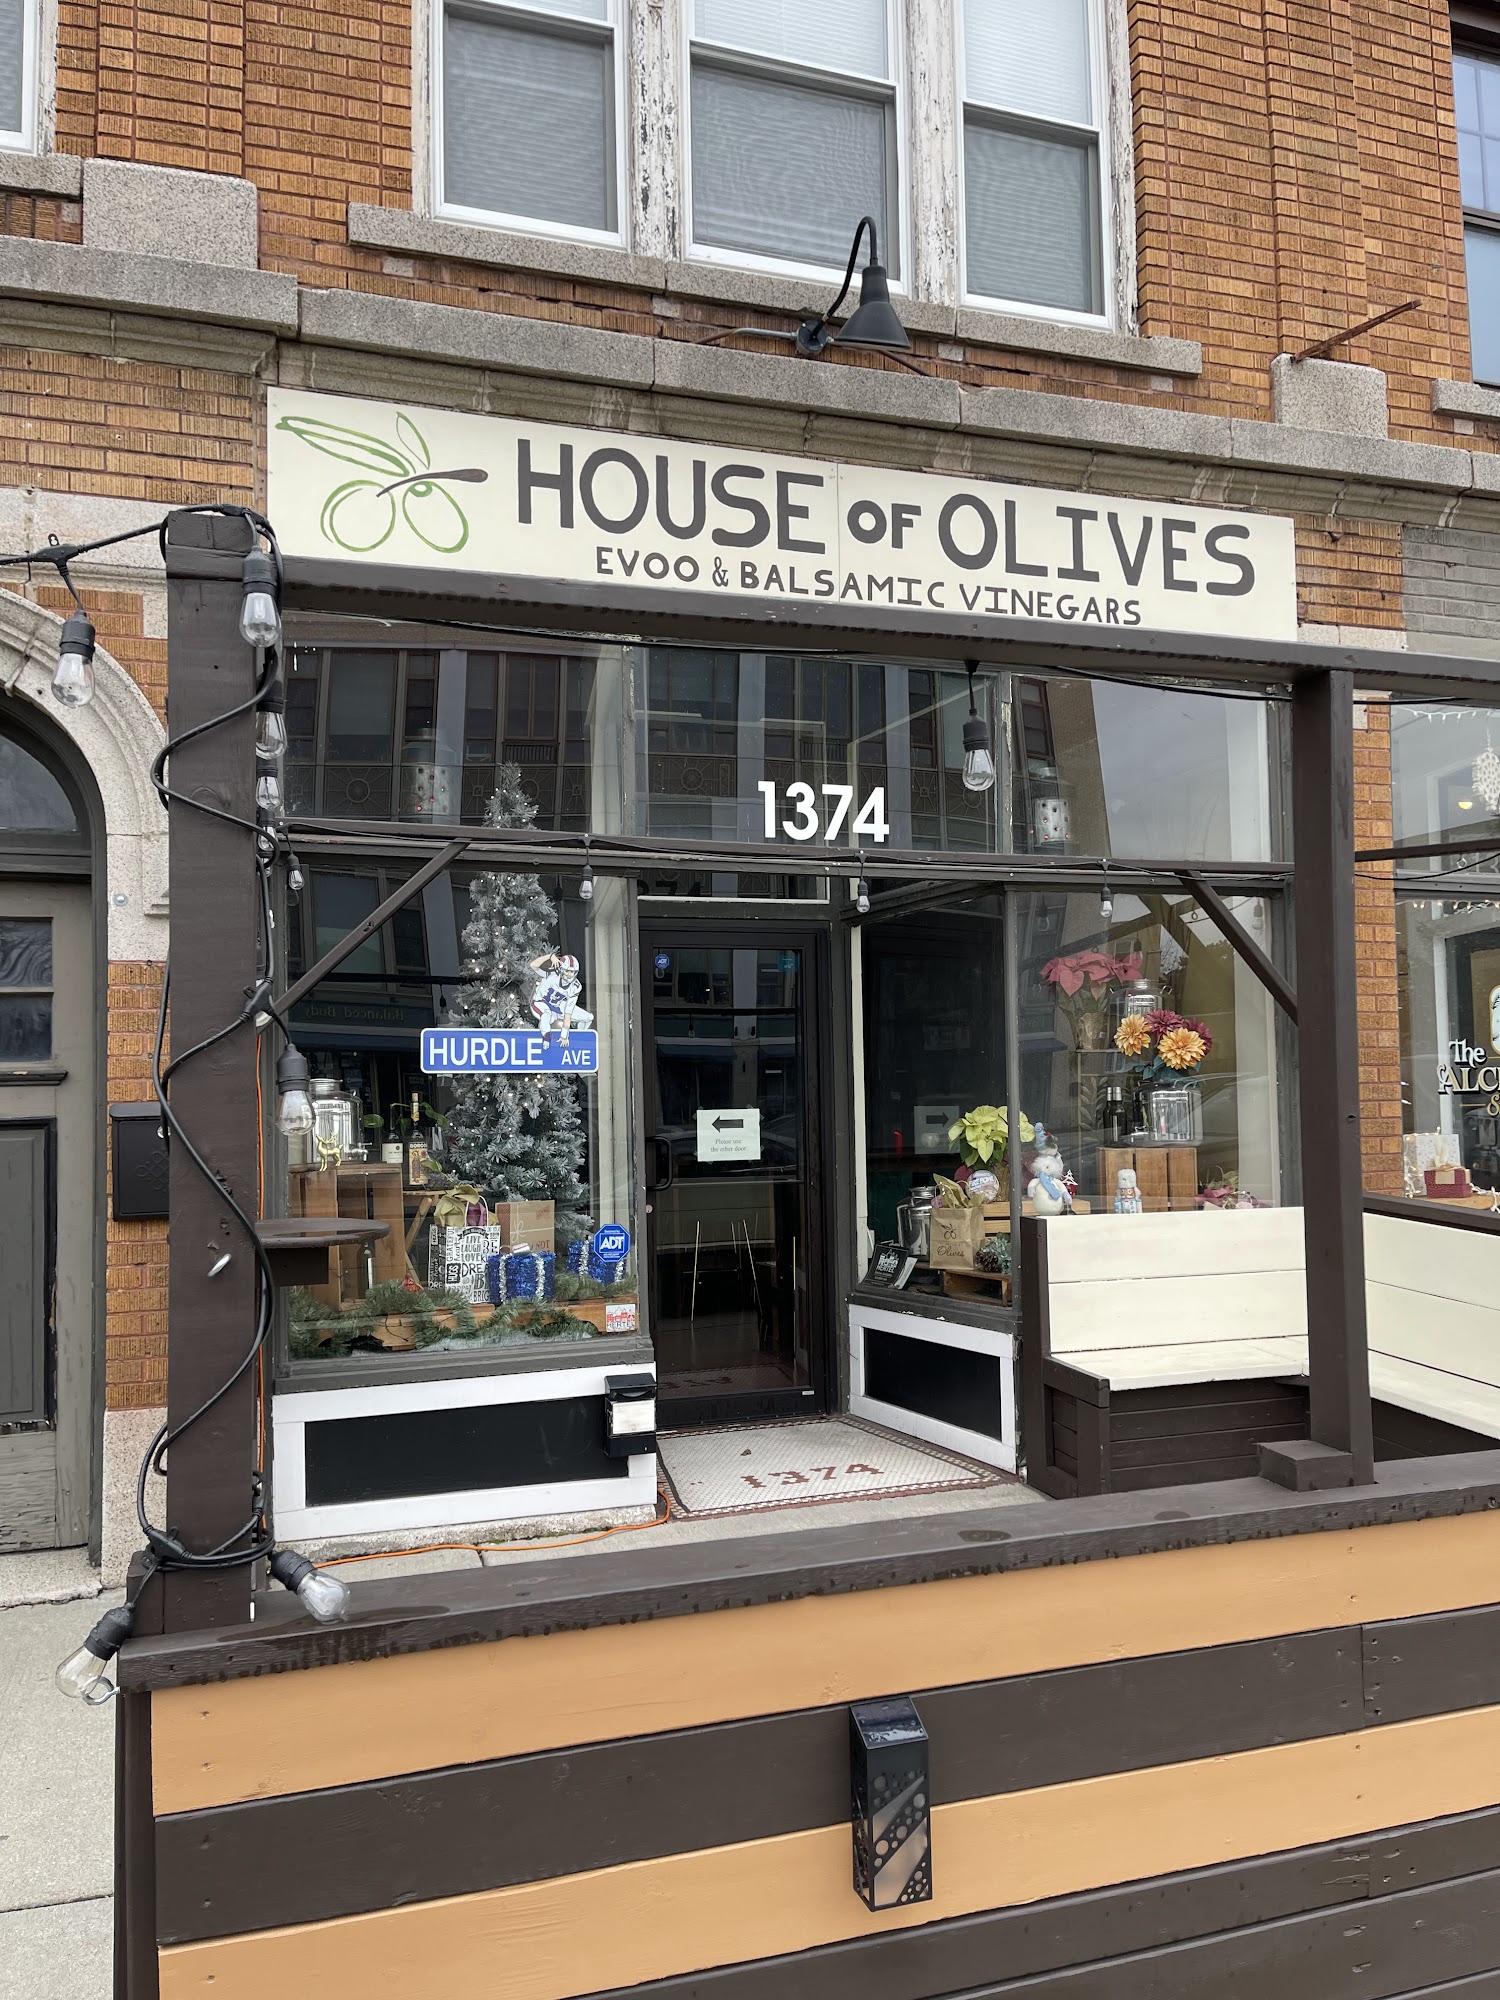 The House of Olives